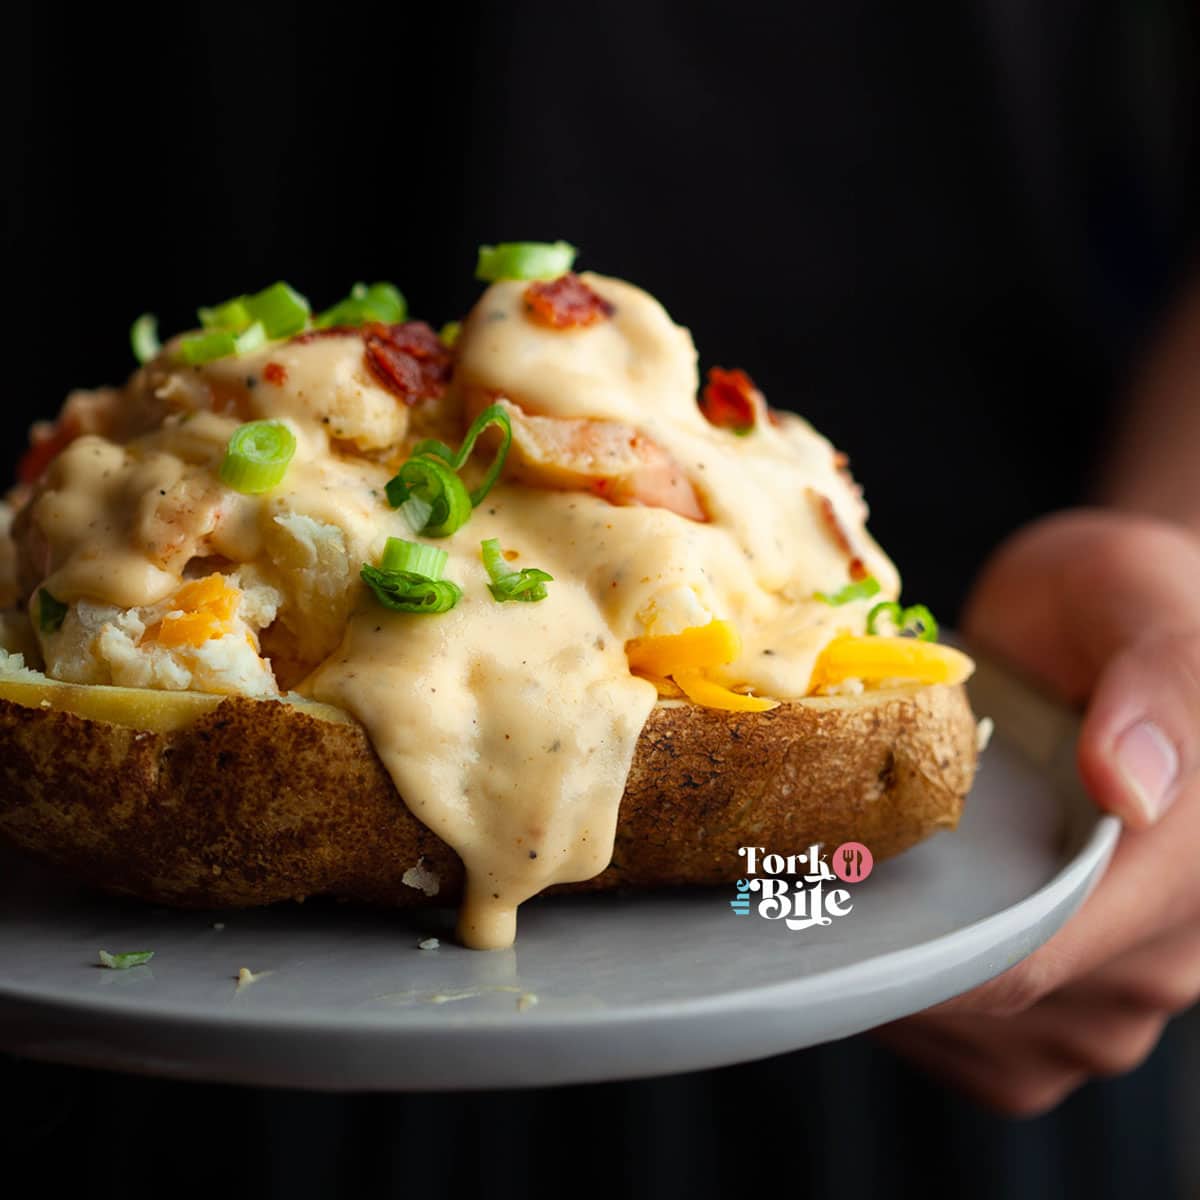 Loaded seafood baked potato is a delicious and hearty dish comprised of a baked potato filled with a generous amount of seafood and toppings. This dish perfectly combines crispy potato skin and a soft and creamy interior, combined with the rich flavors of seafood and seasonings.